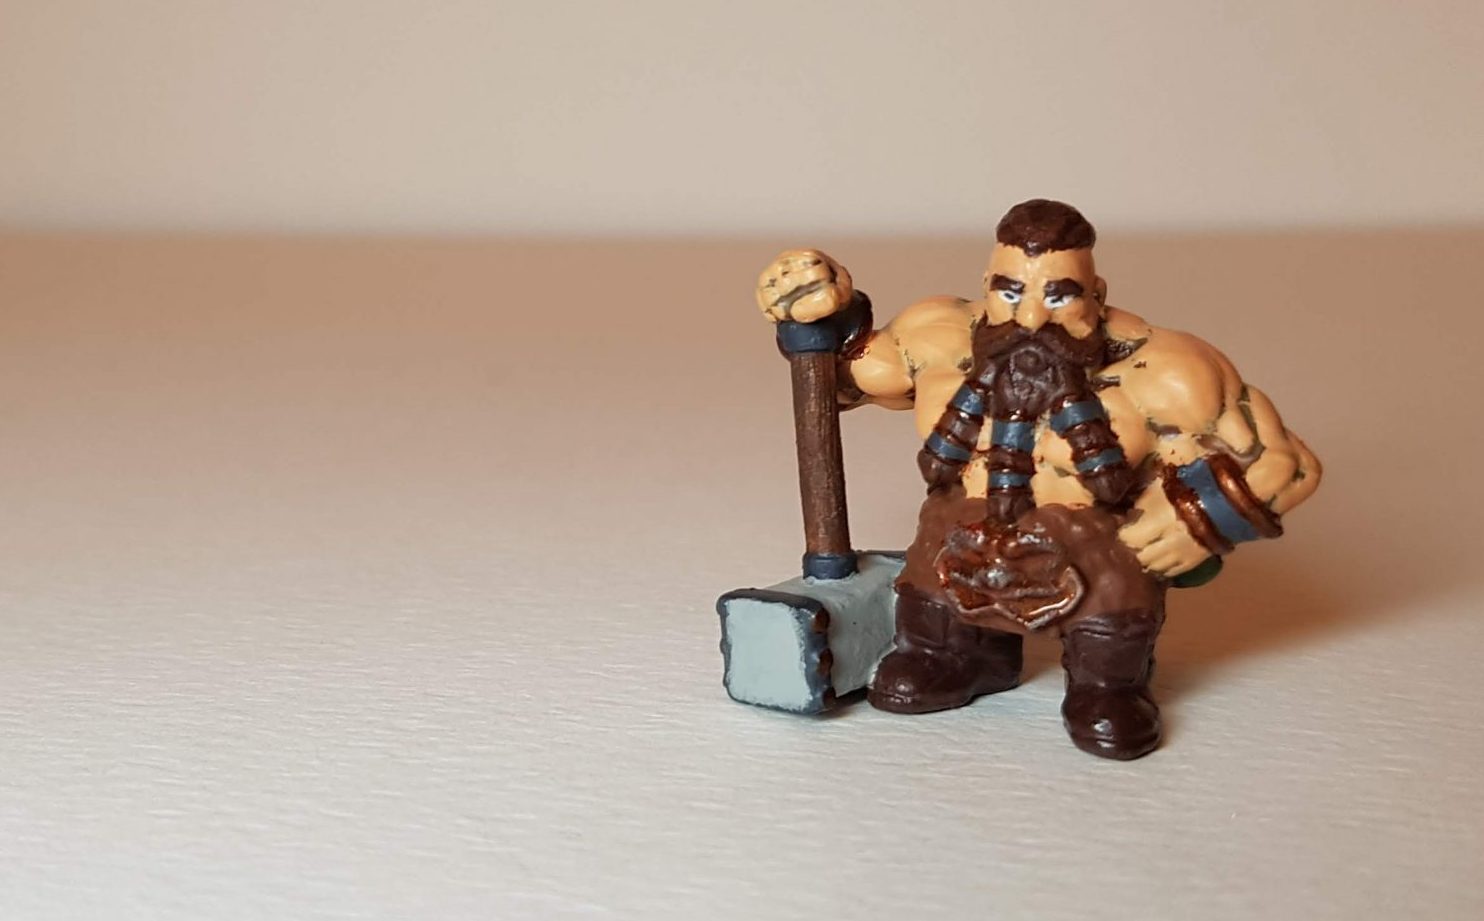 Painted Bjorn Steeleblood (Dwarf) - View 4 - 28mm Scale - 3D Printed By Wright Built on Sparkmaker FHD - Designed by Capritor (Thingiverse)